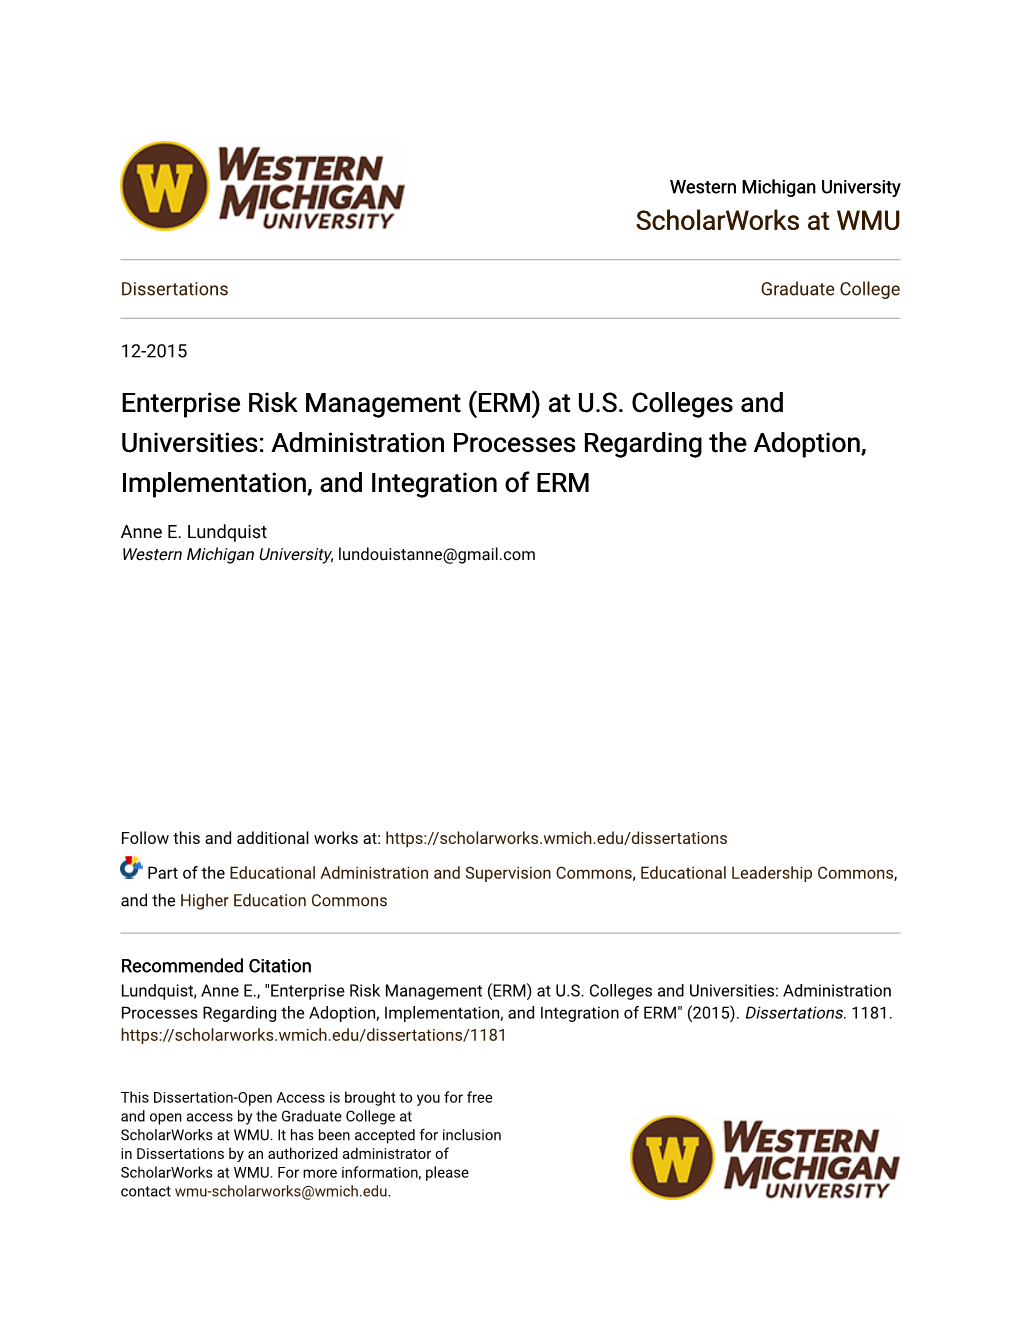 Enterprise Risk Management (ERM) at US Colleges and Universities